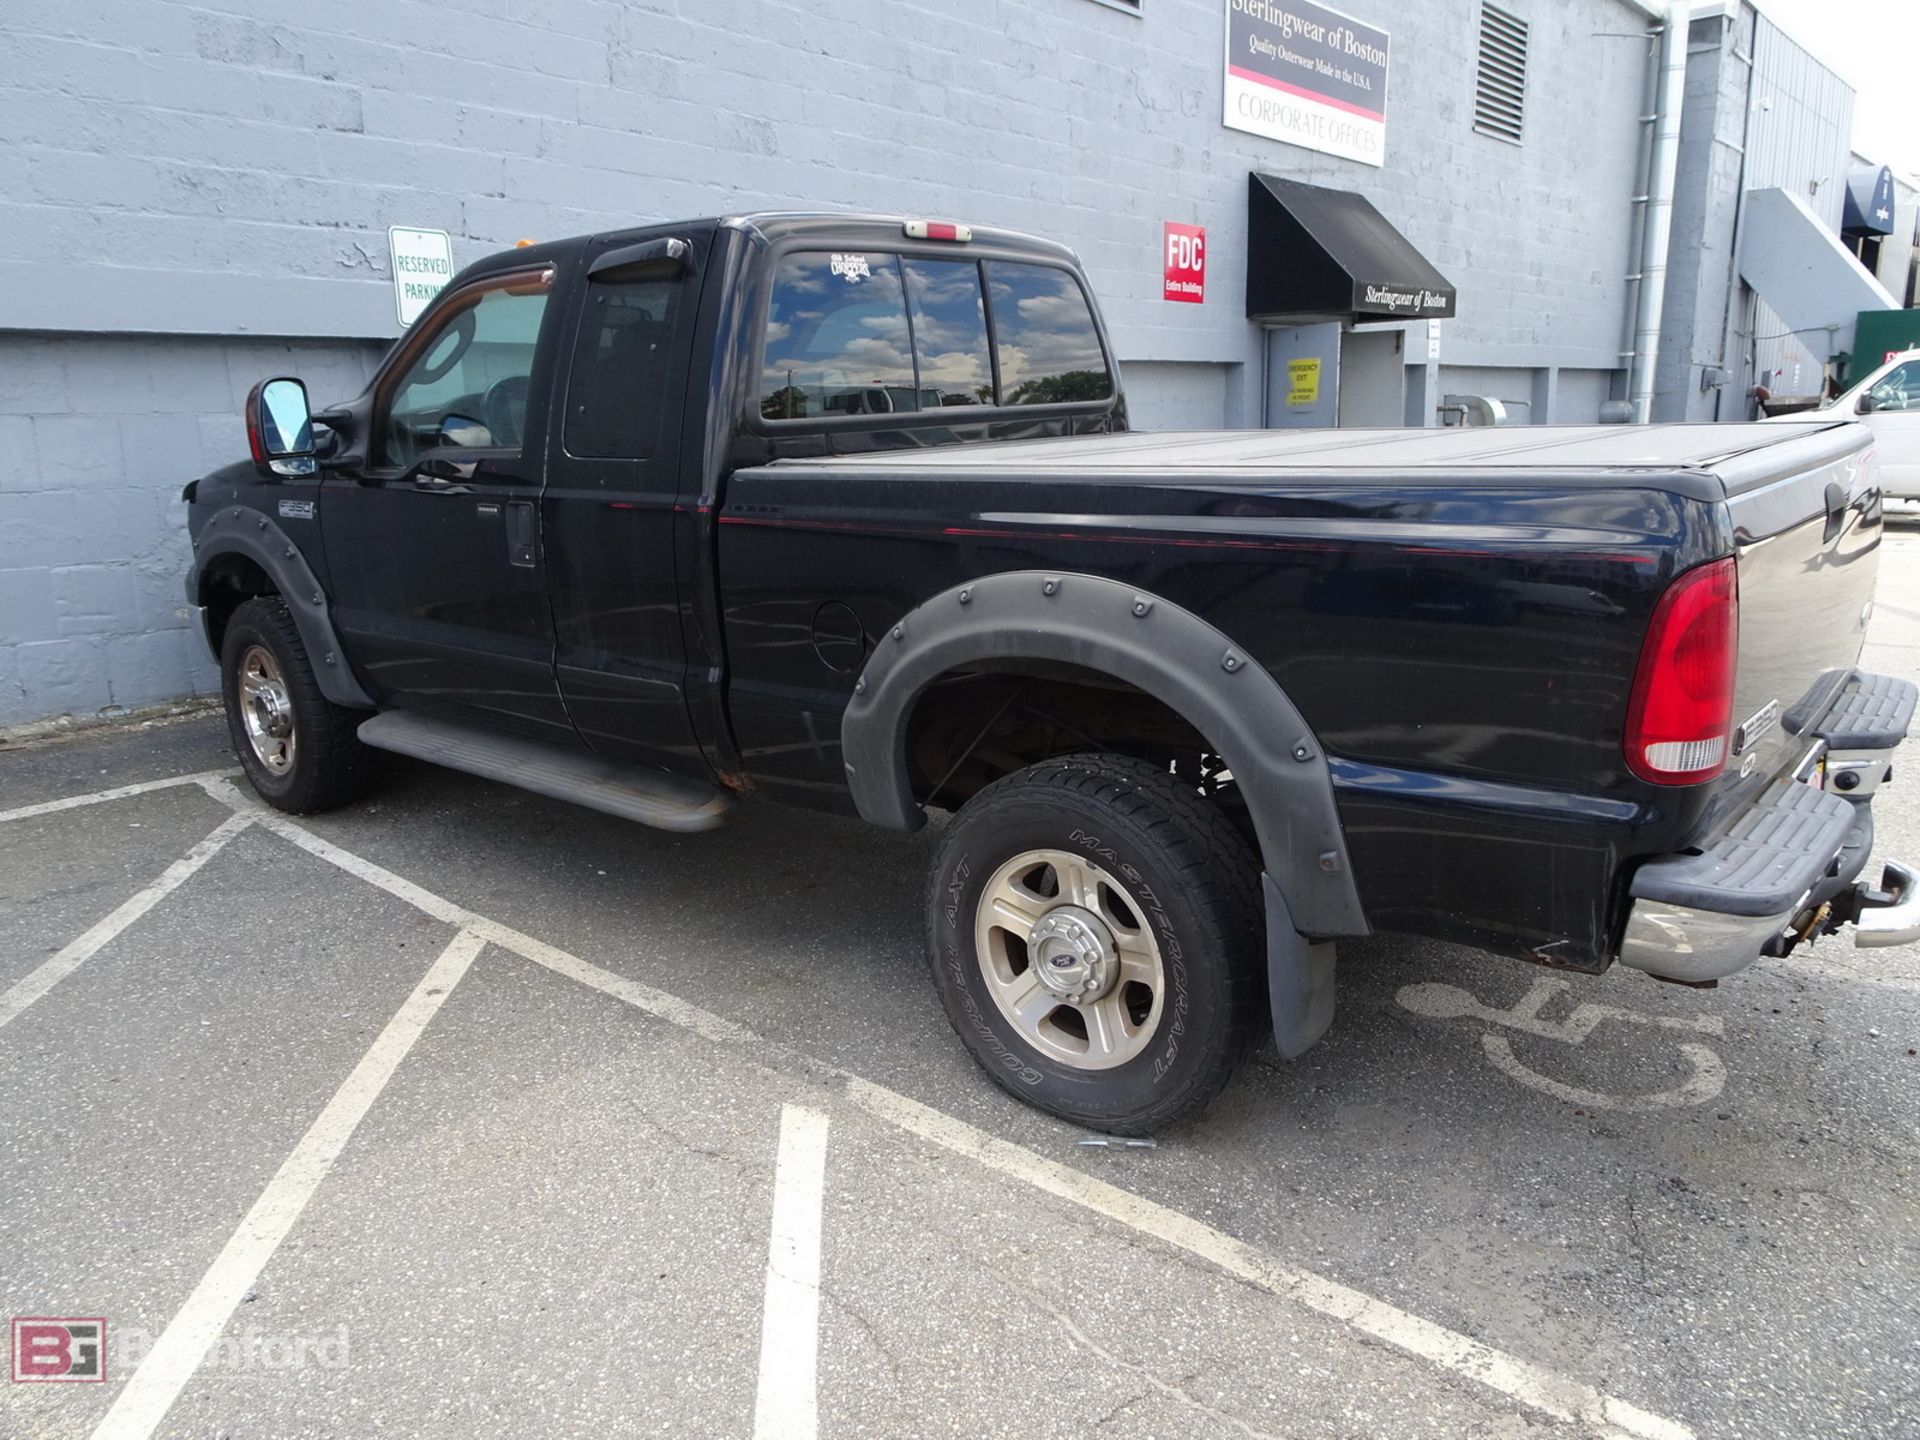 2005 Ford F-350 Pickup Truck - Image 4 of 6